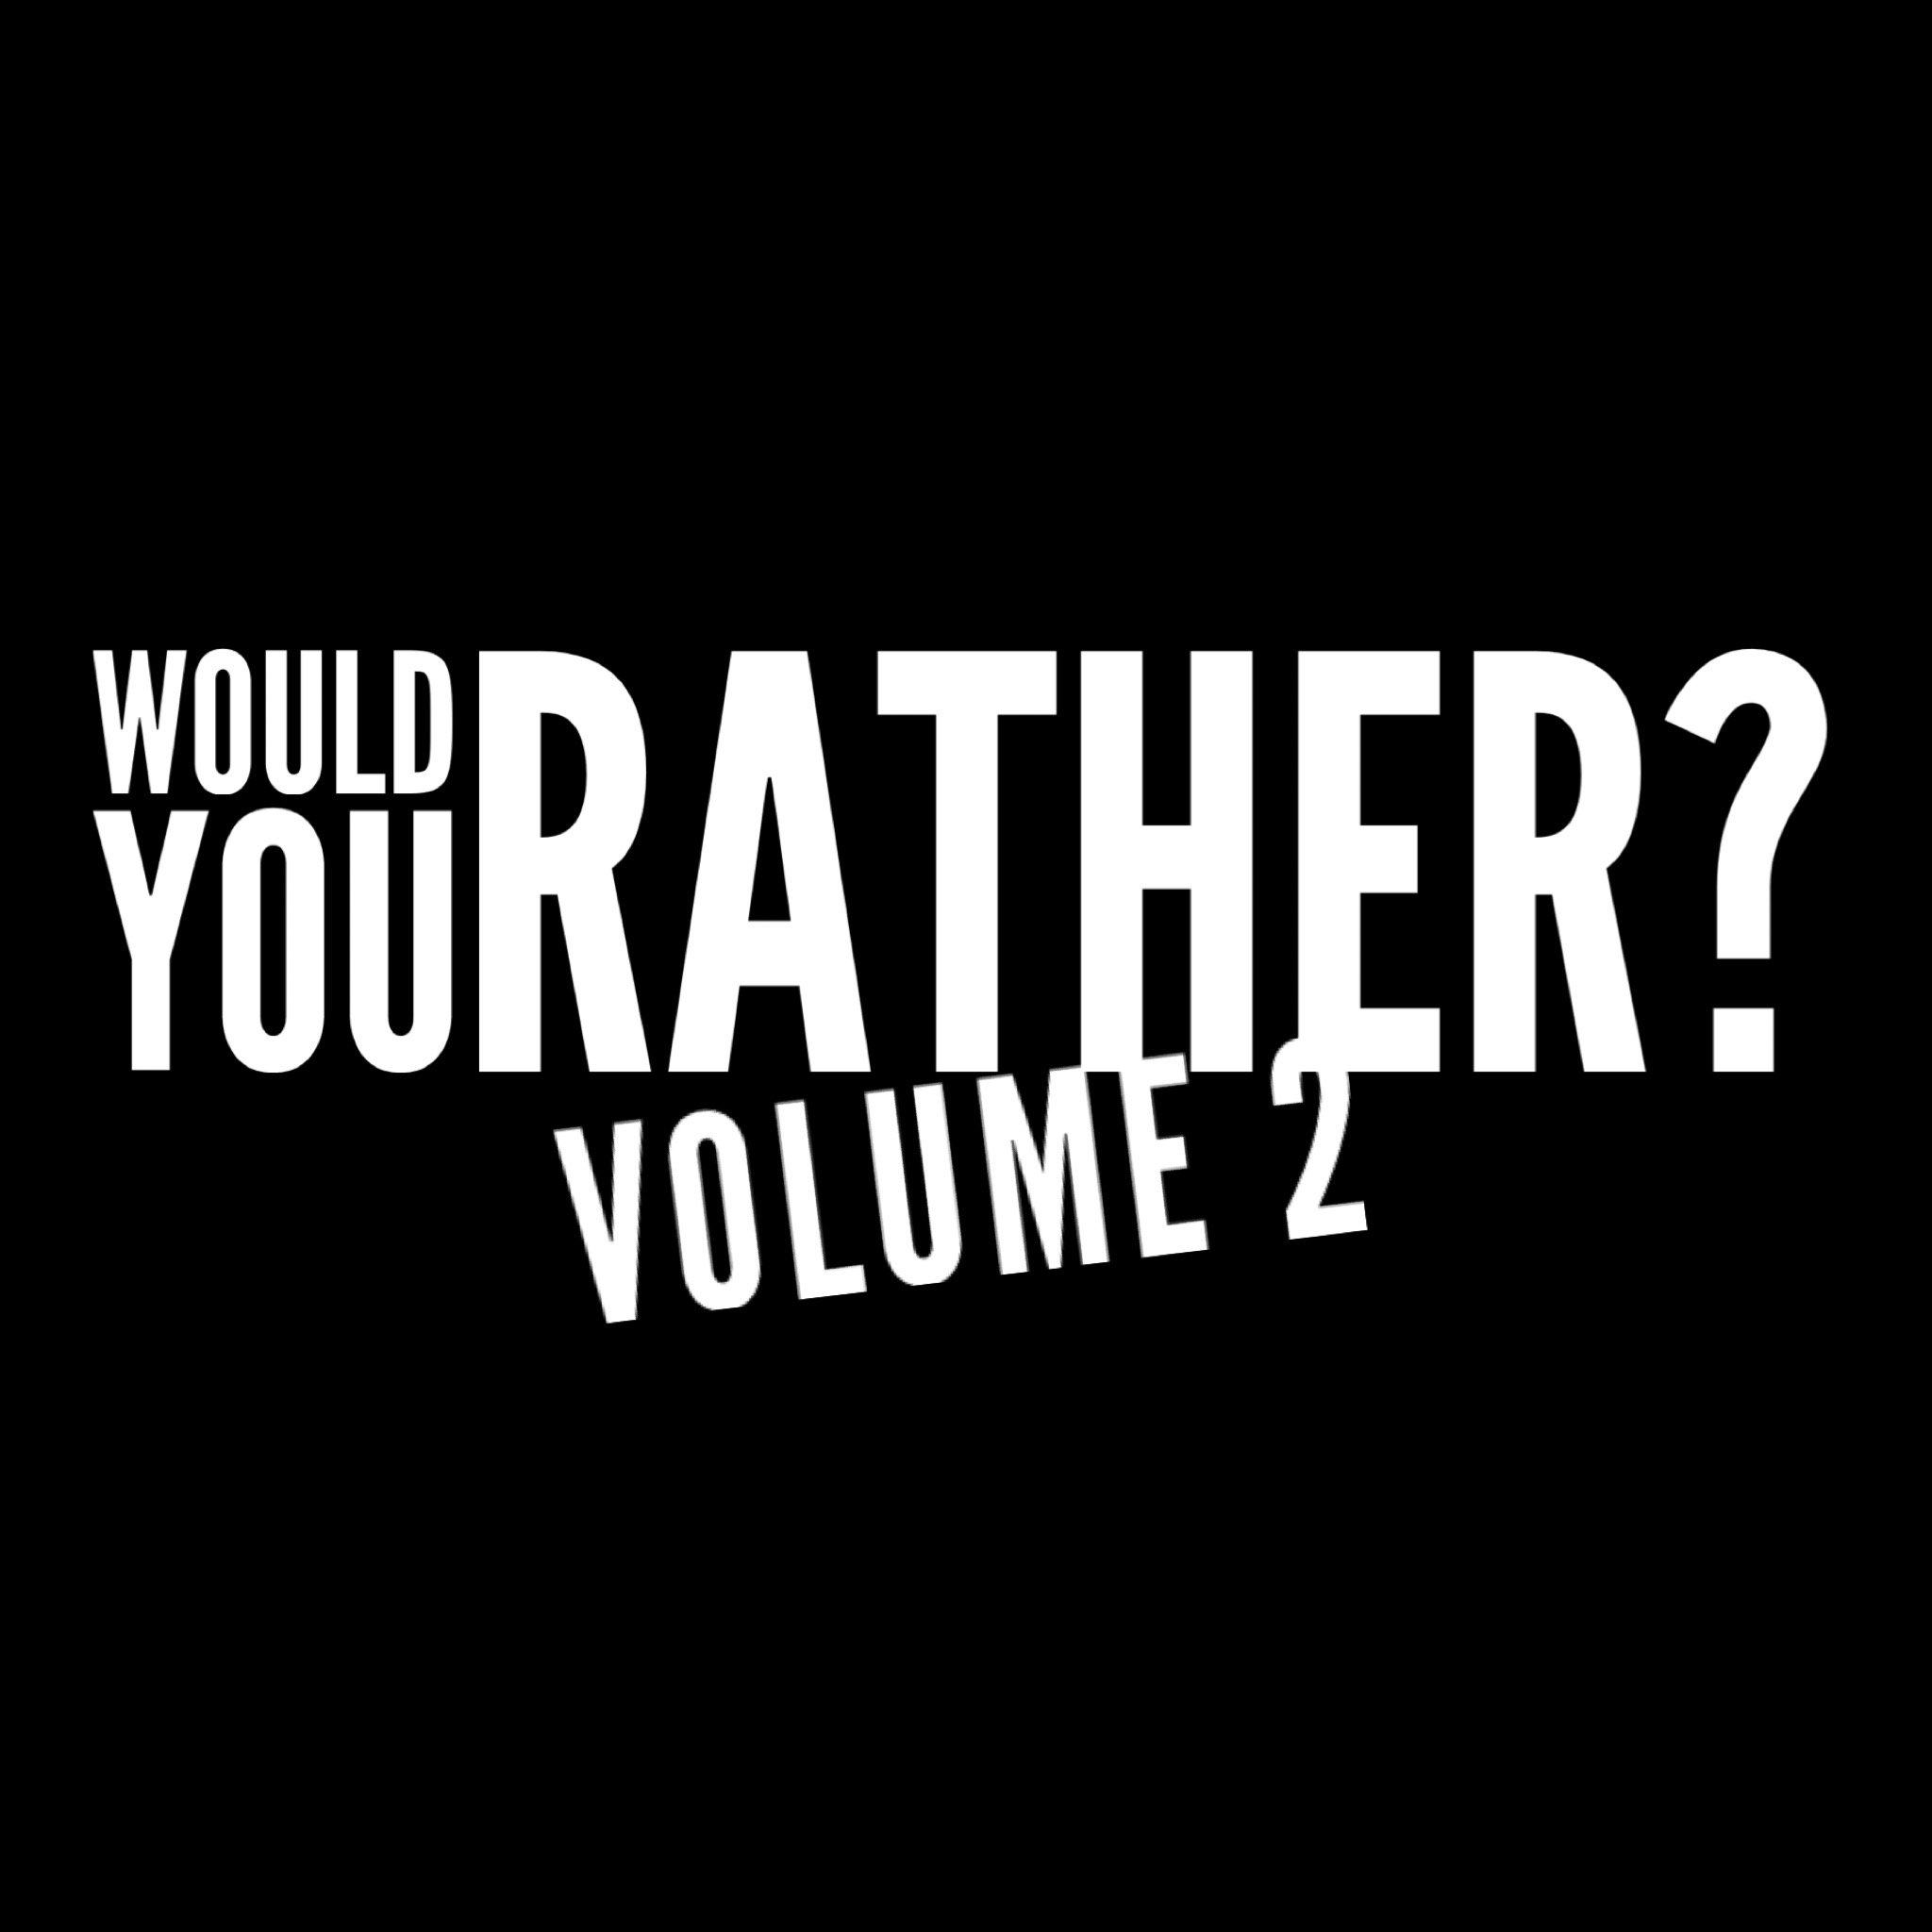 Would You Rather? Volume 2